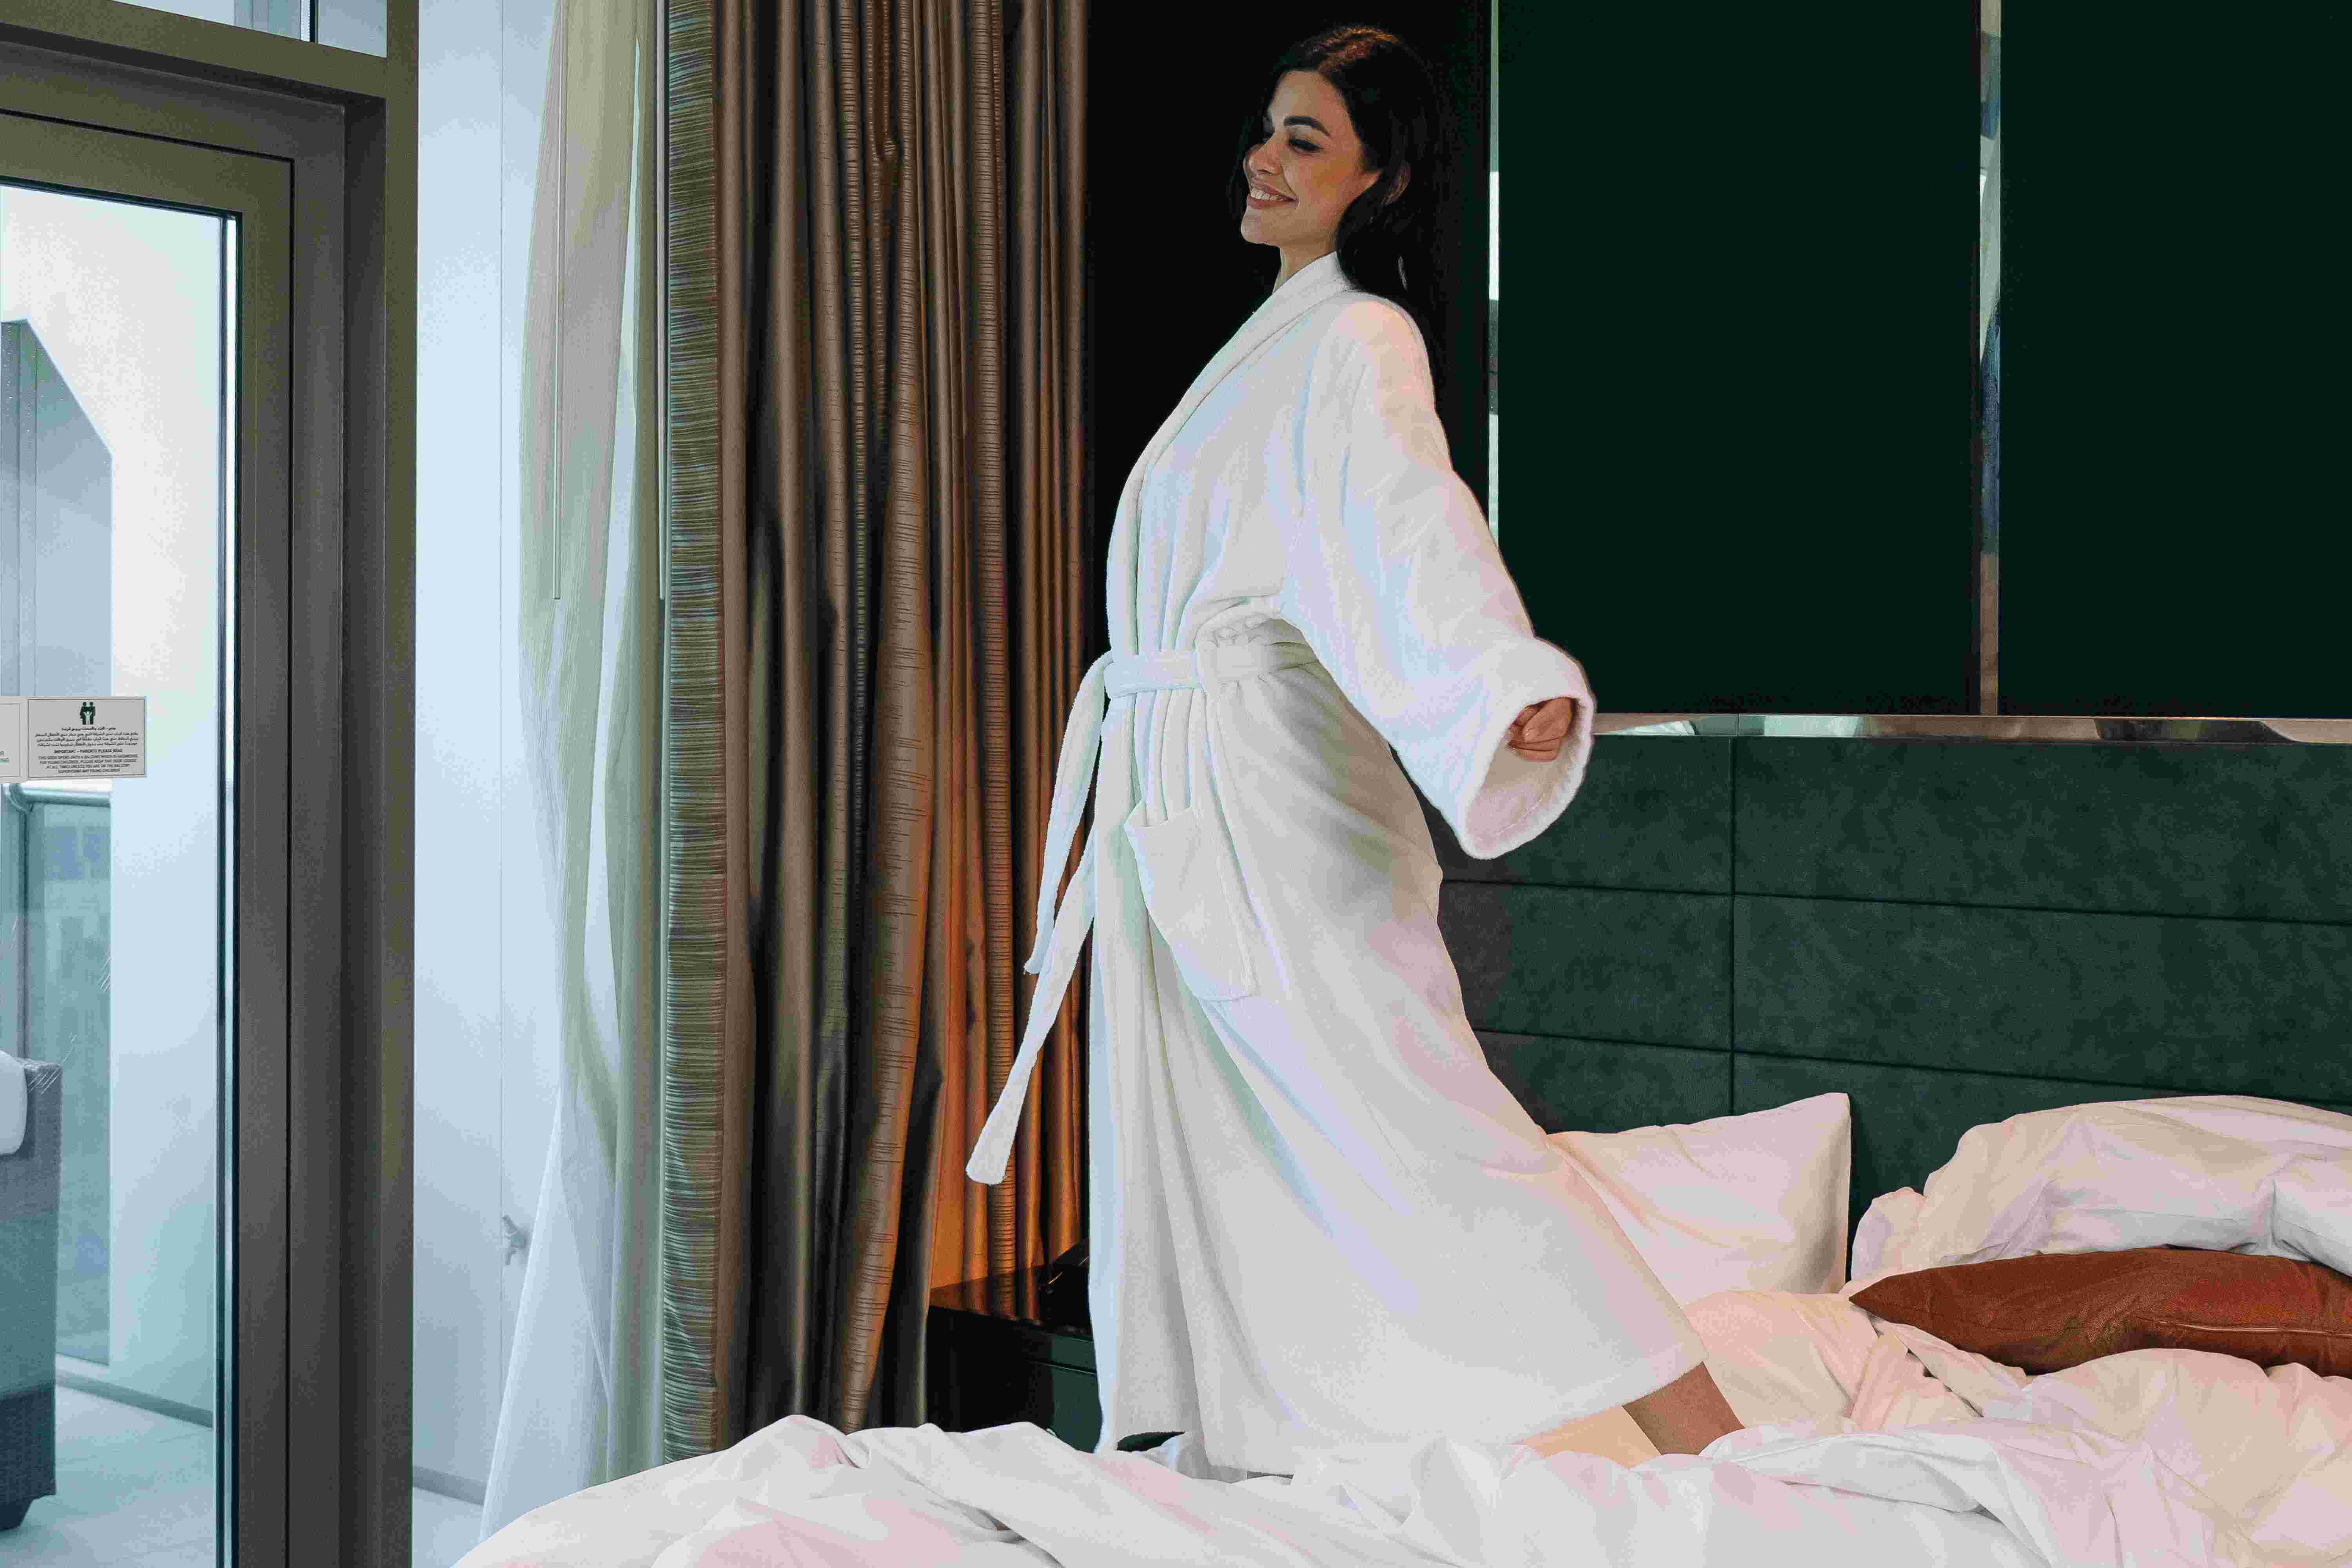 Woman in white robe standing on top of white bed with grey headboard and gold curtains in the background